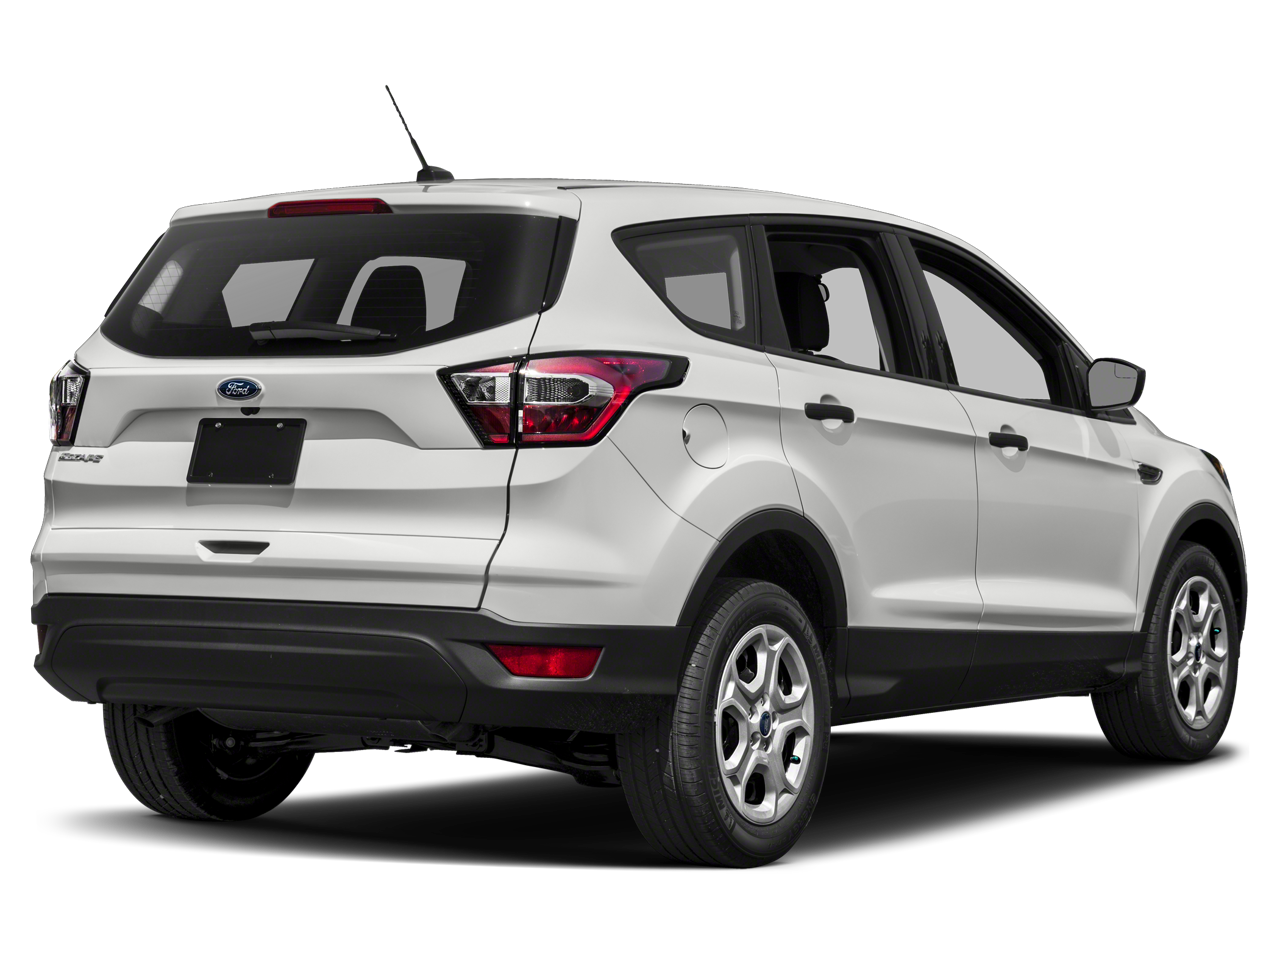 Used 2019 Ford Escape Titanium with VIN 1FMCU9J97KUA19980 for sale in New Prague, Minnesota